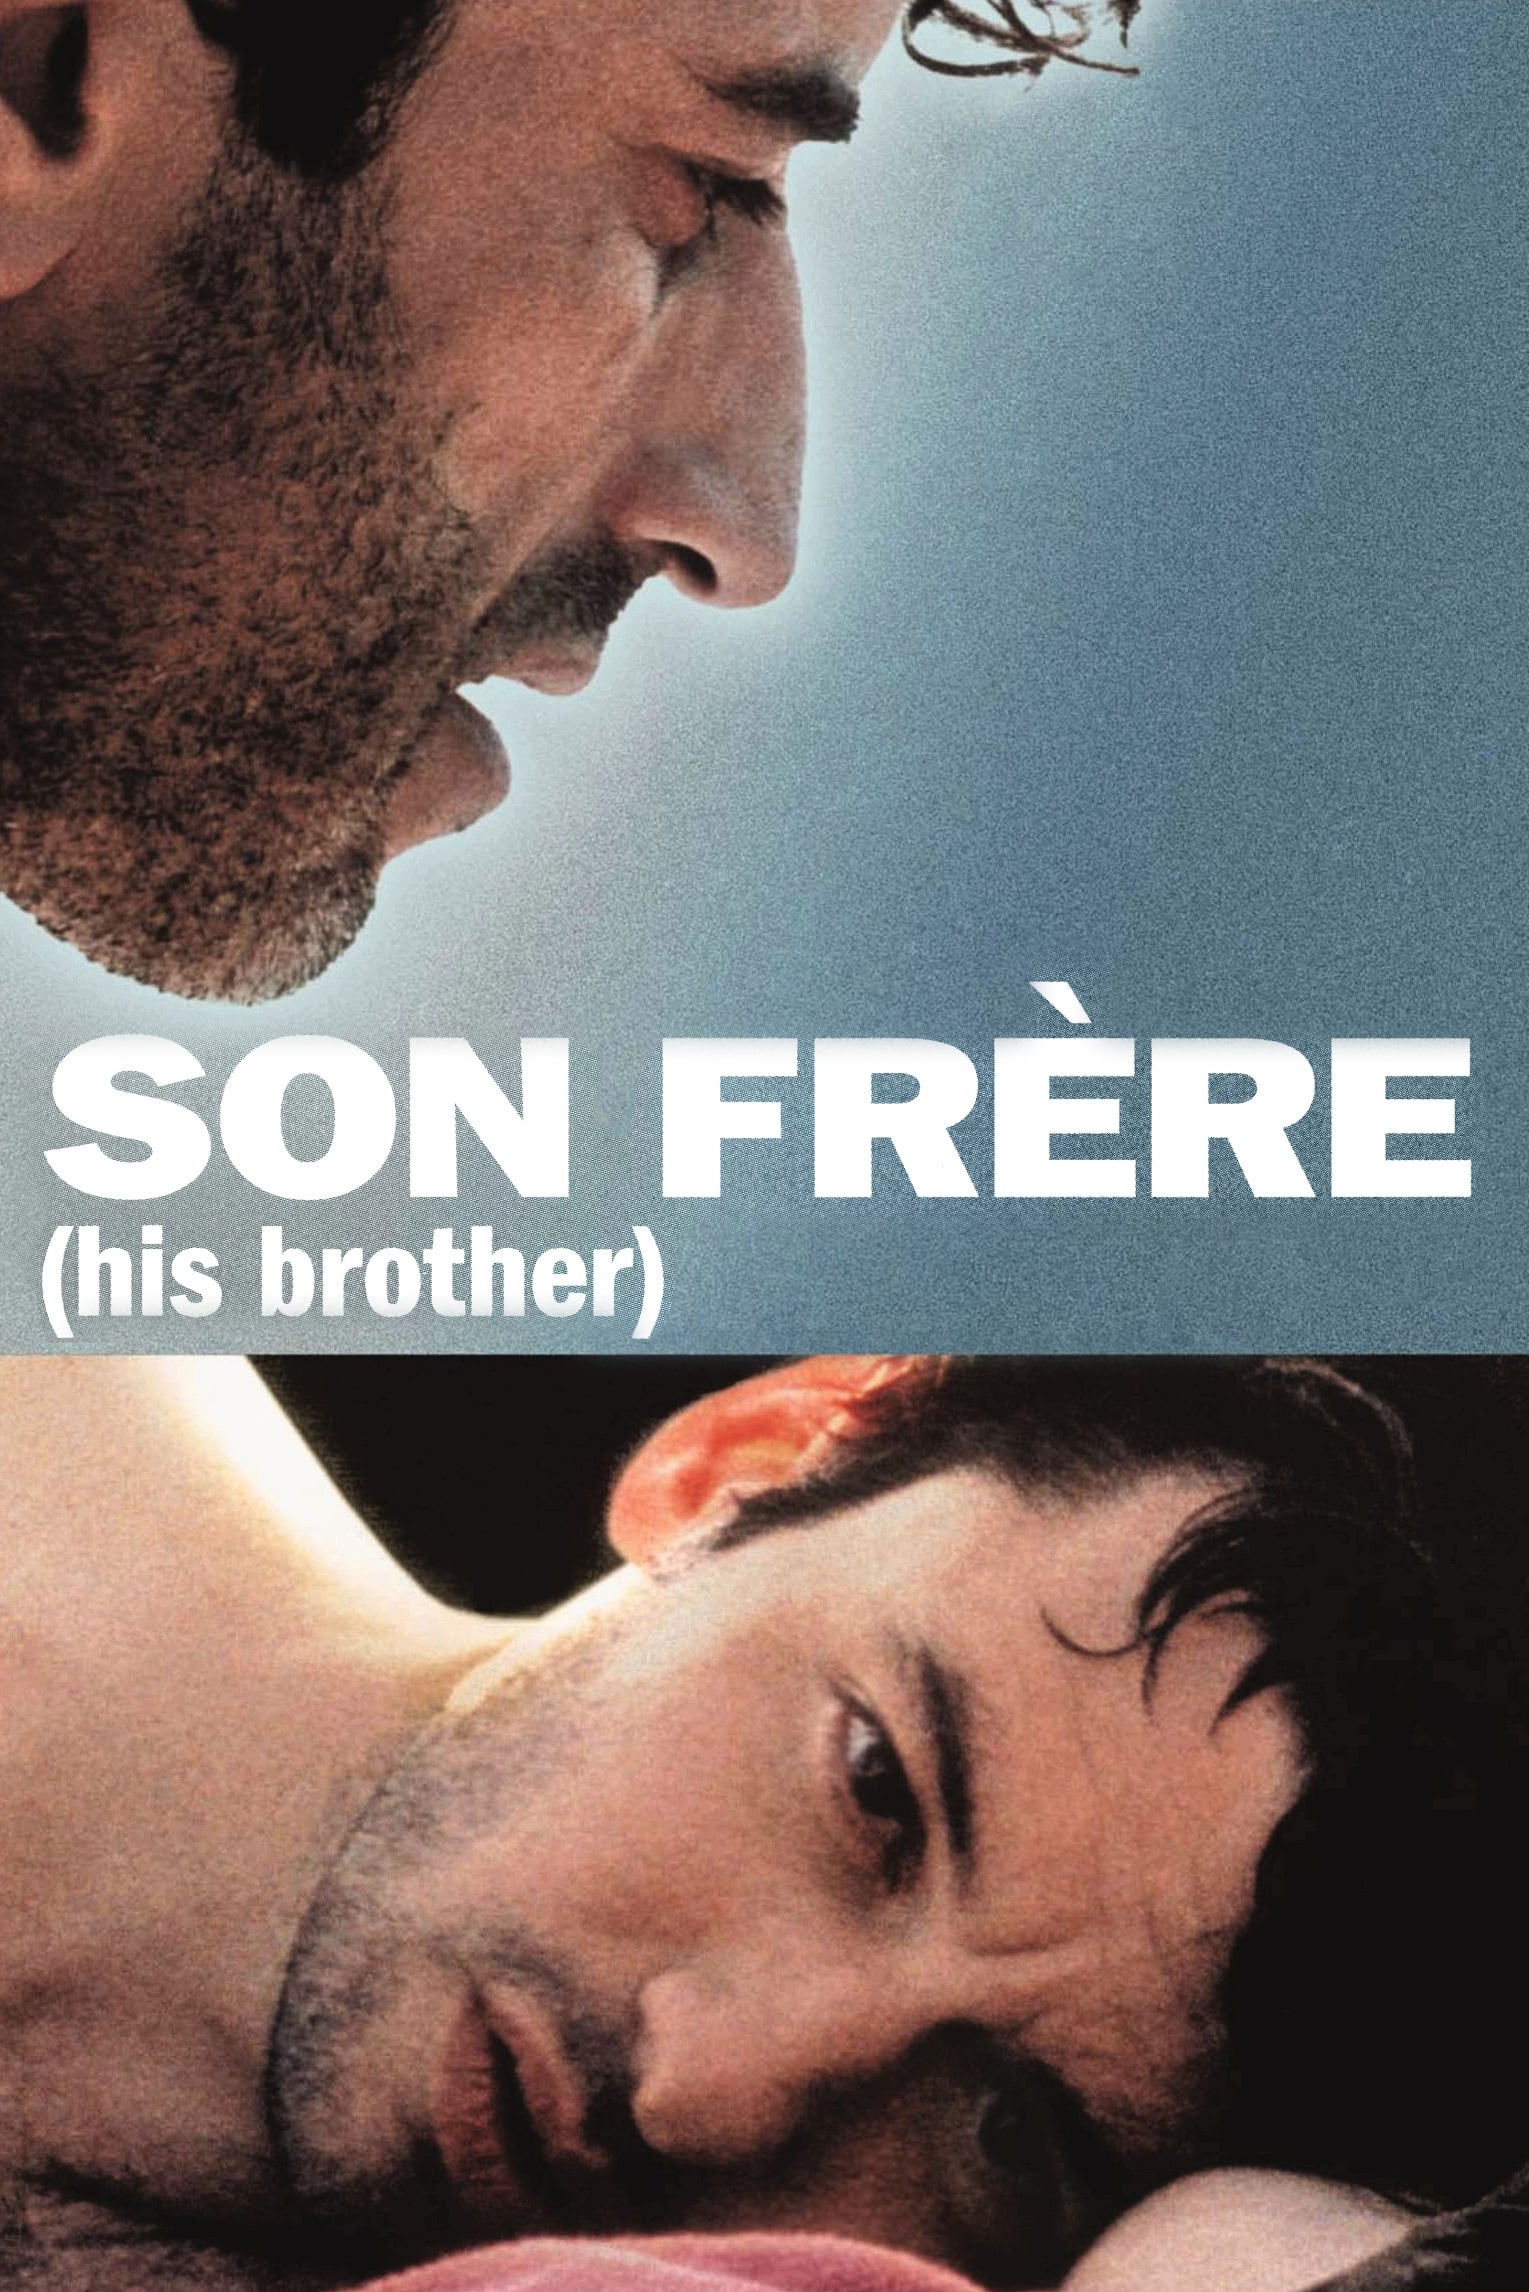 His Brother (2003)